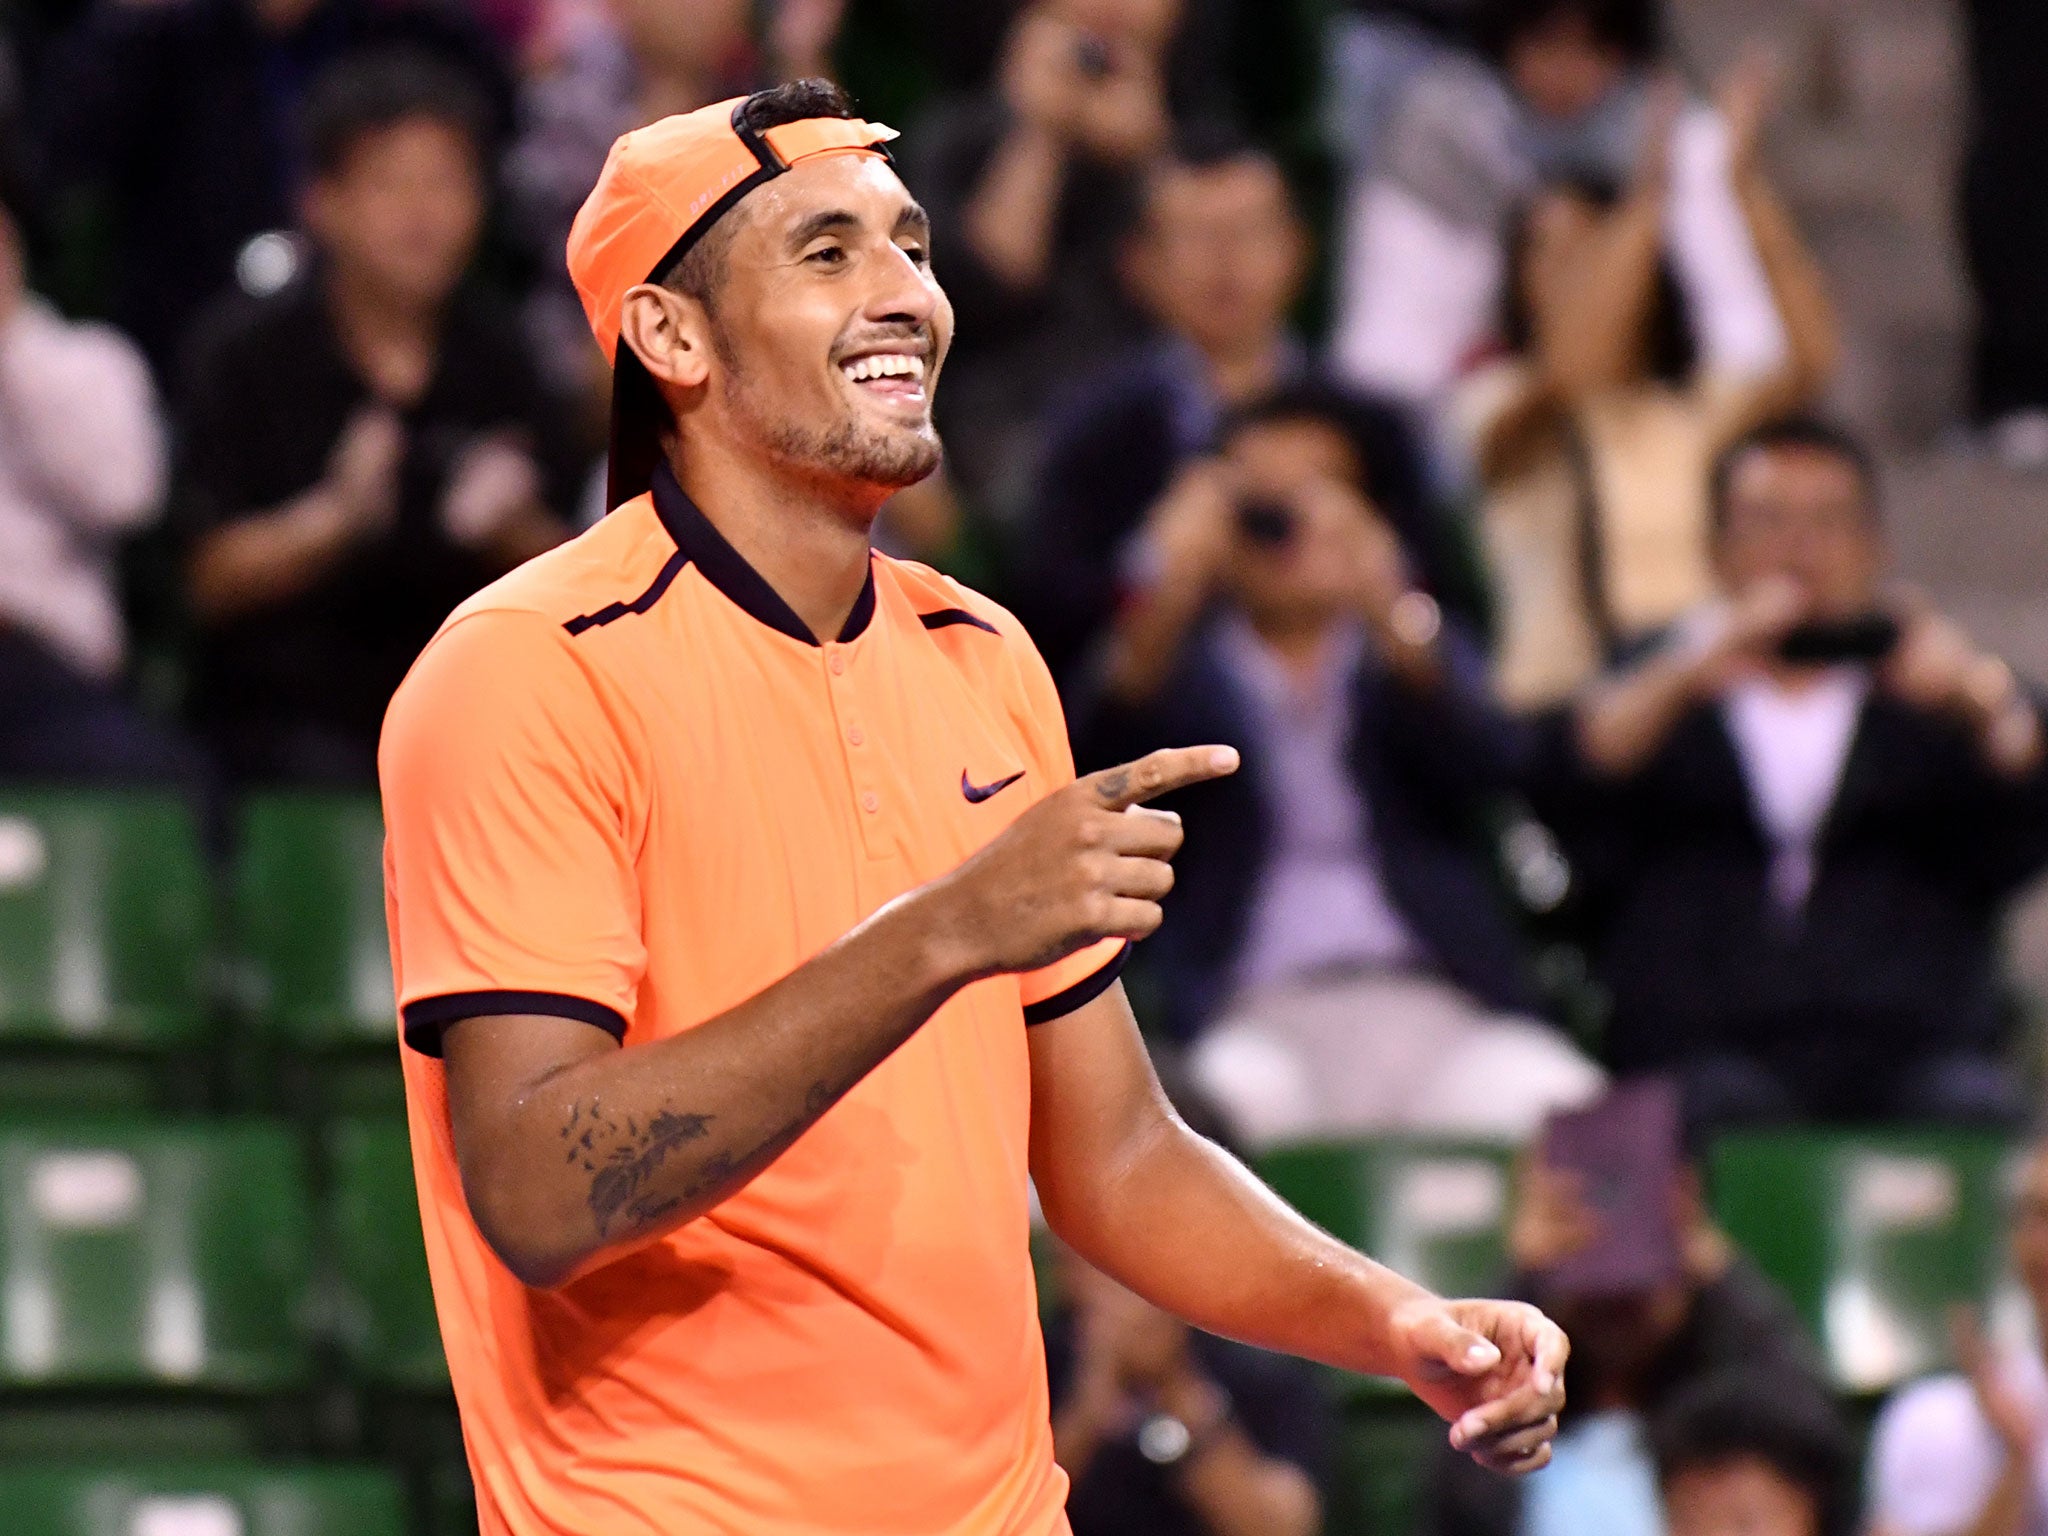 Kyrgios is currently serving a suspension for his actions at last week's Shanghai Masters